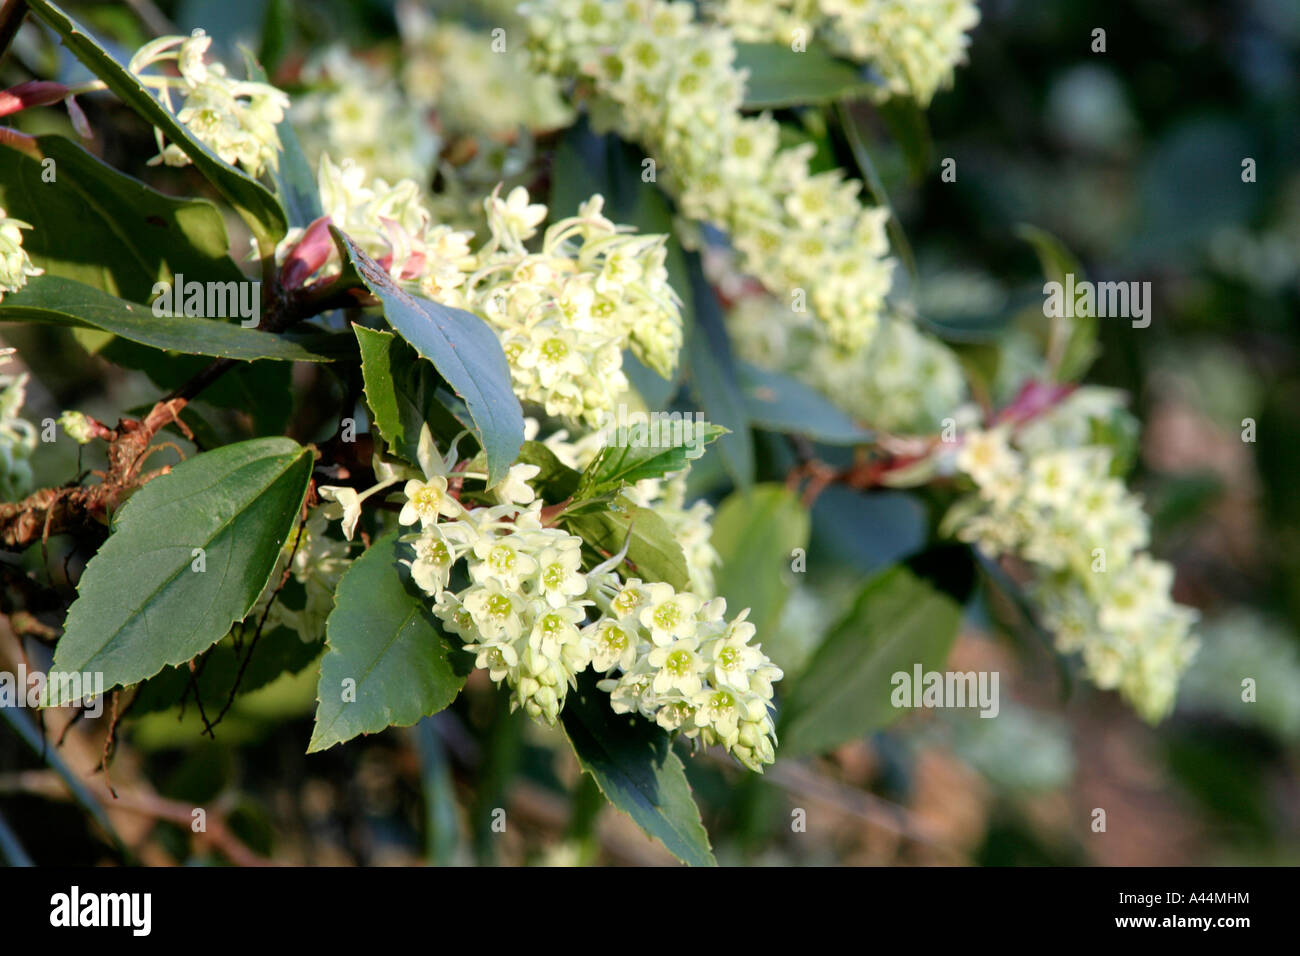 Ribes laurifolium flower early February Stock Photo